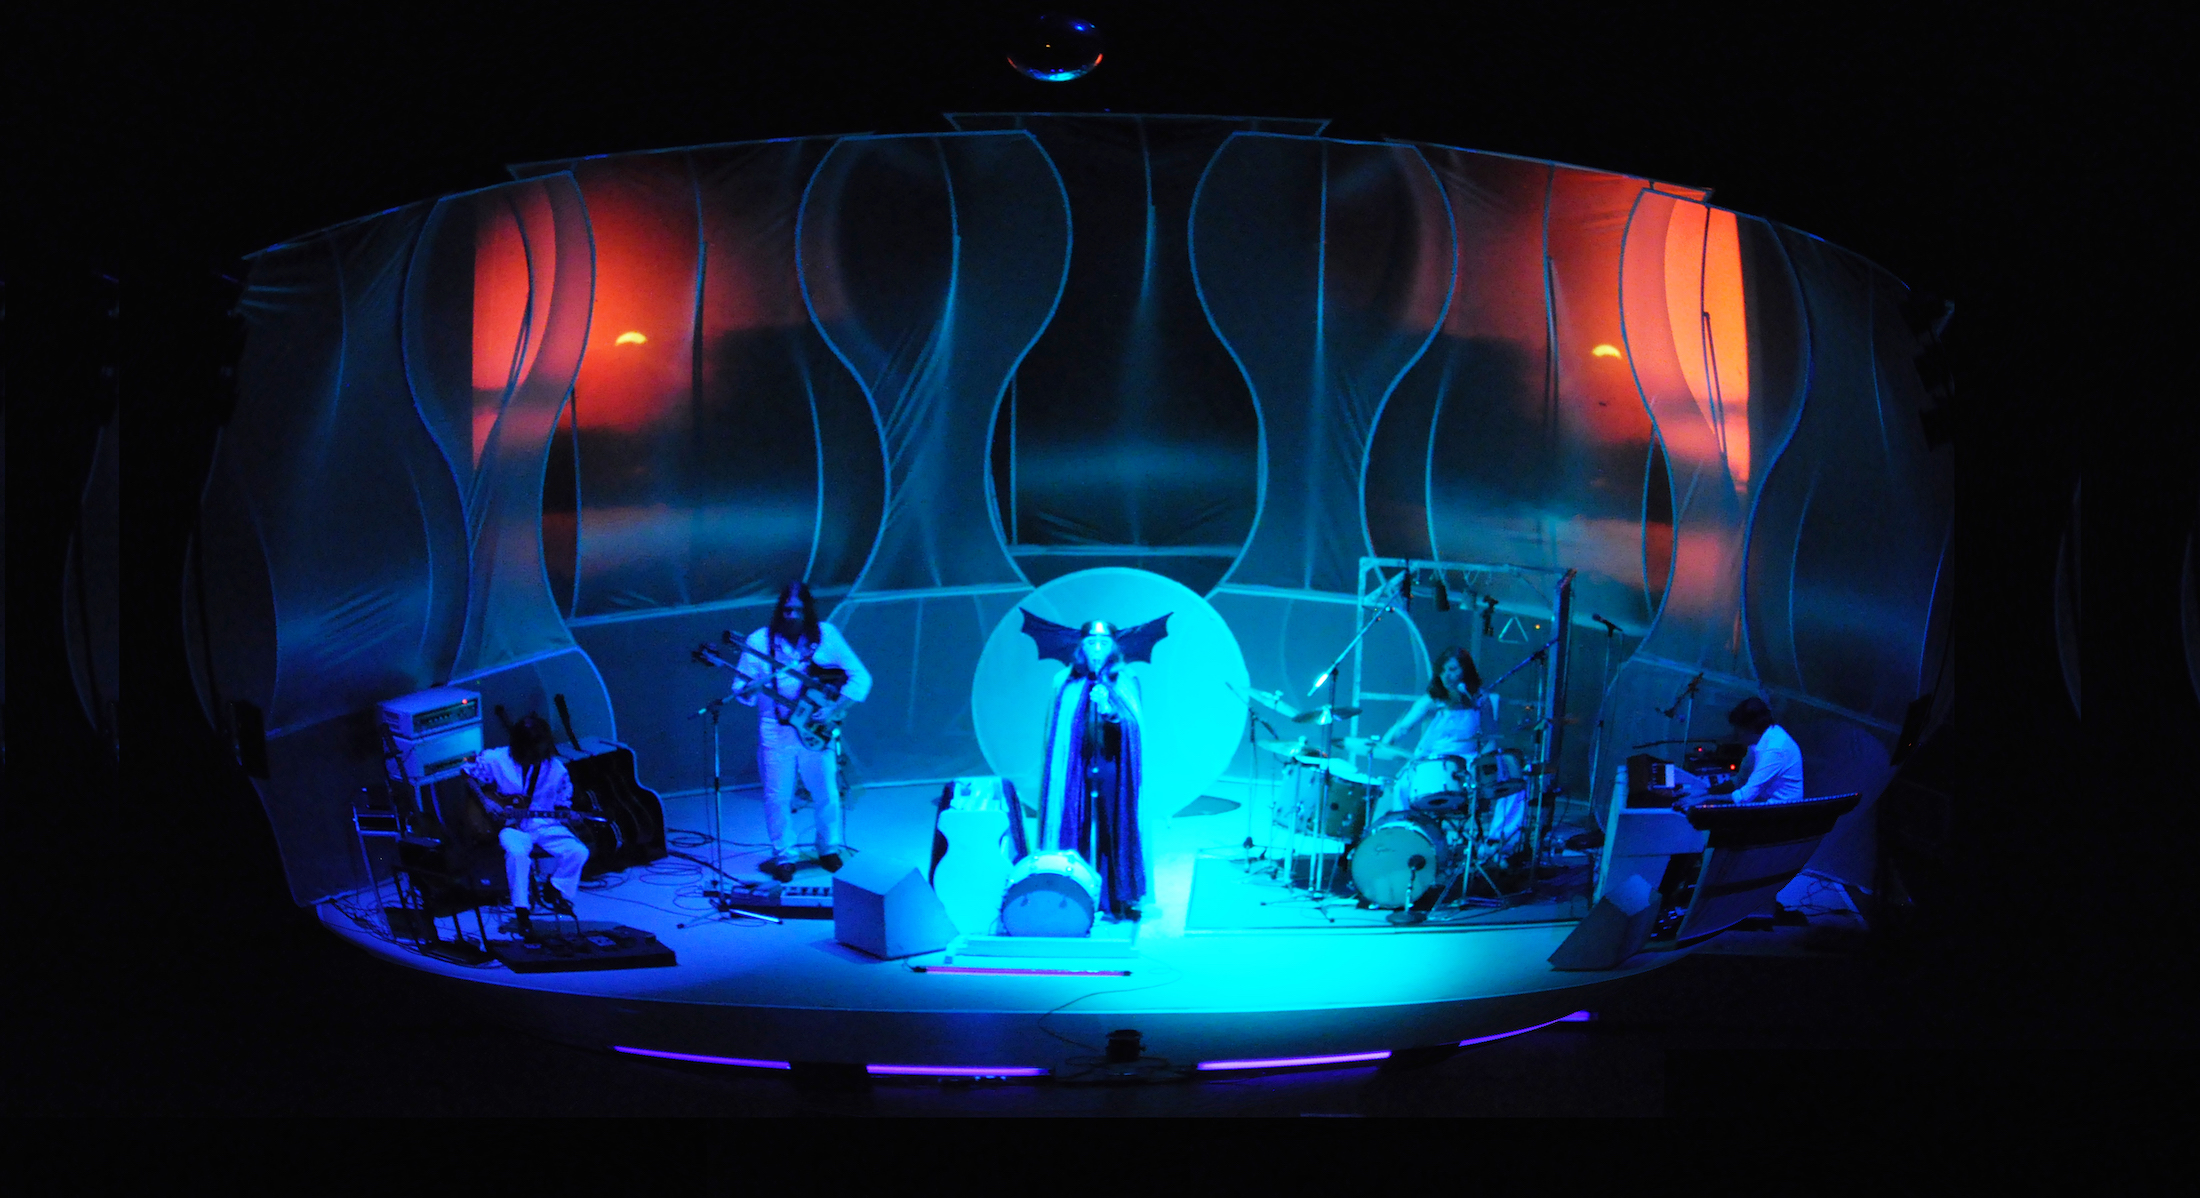 The Musical Box’s Tour Gives Genesis, The Lamb Lies Down on Broadway